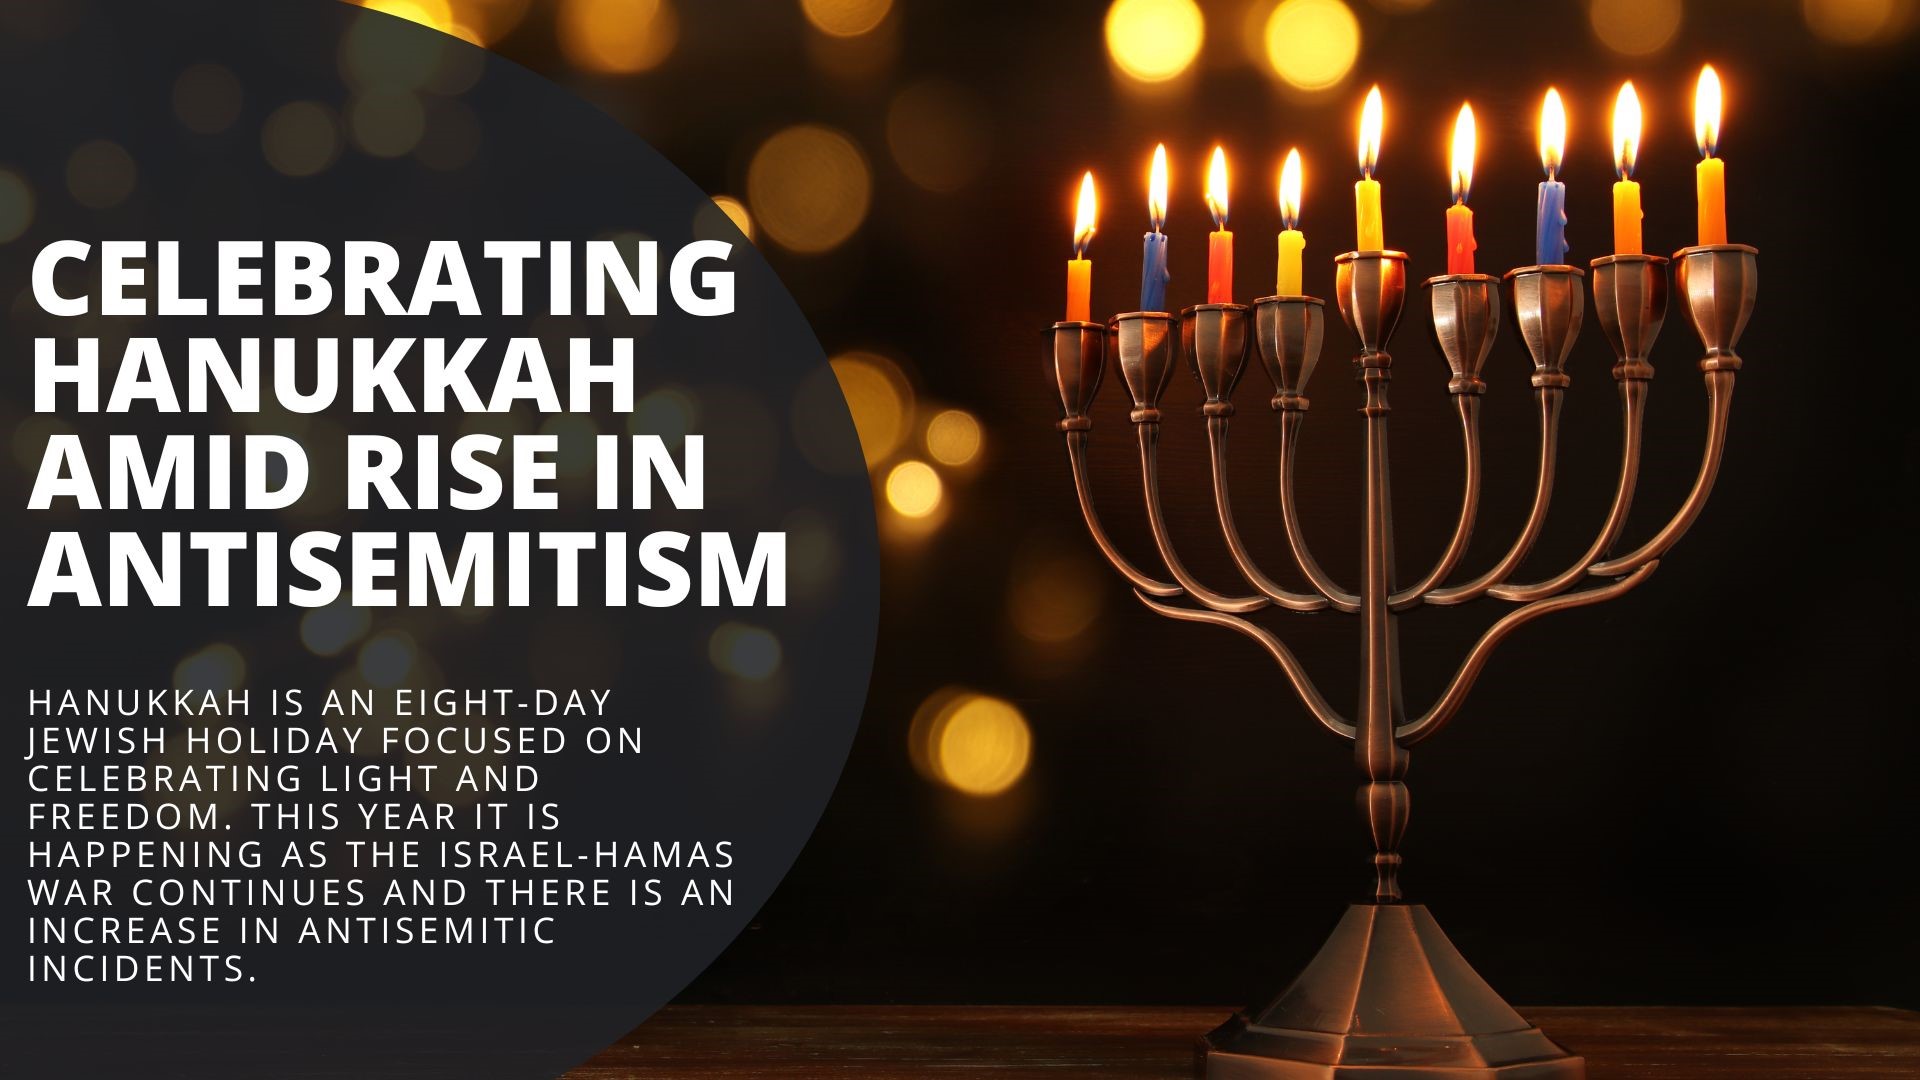 Hanukkah is an eight-day Jewish holiday focused on celebrating light and freedom. This year it is happening as the Israel-Hamas war continues on.